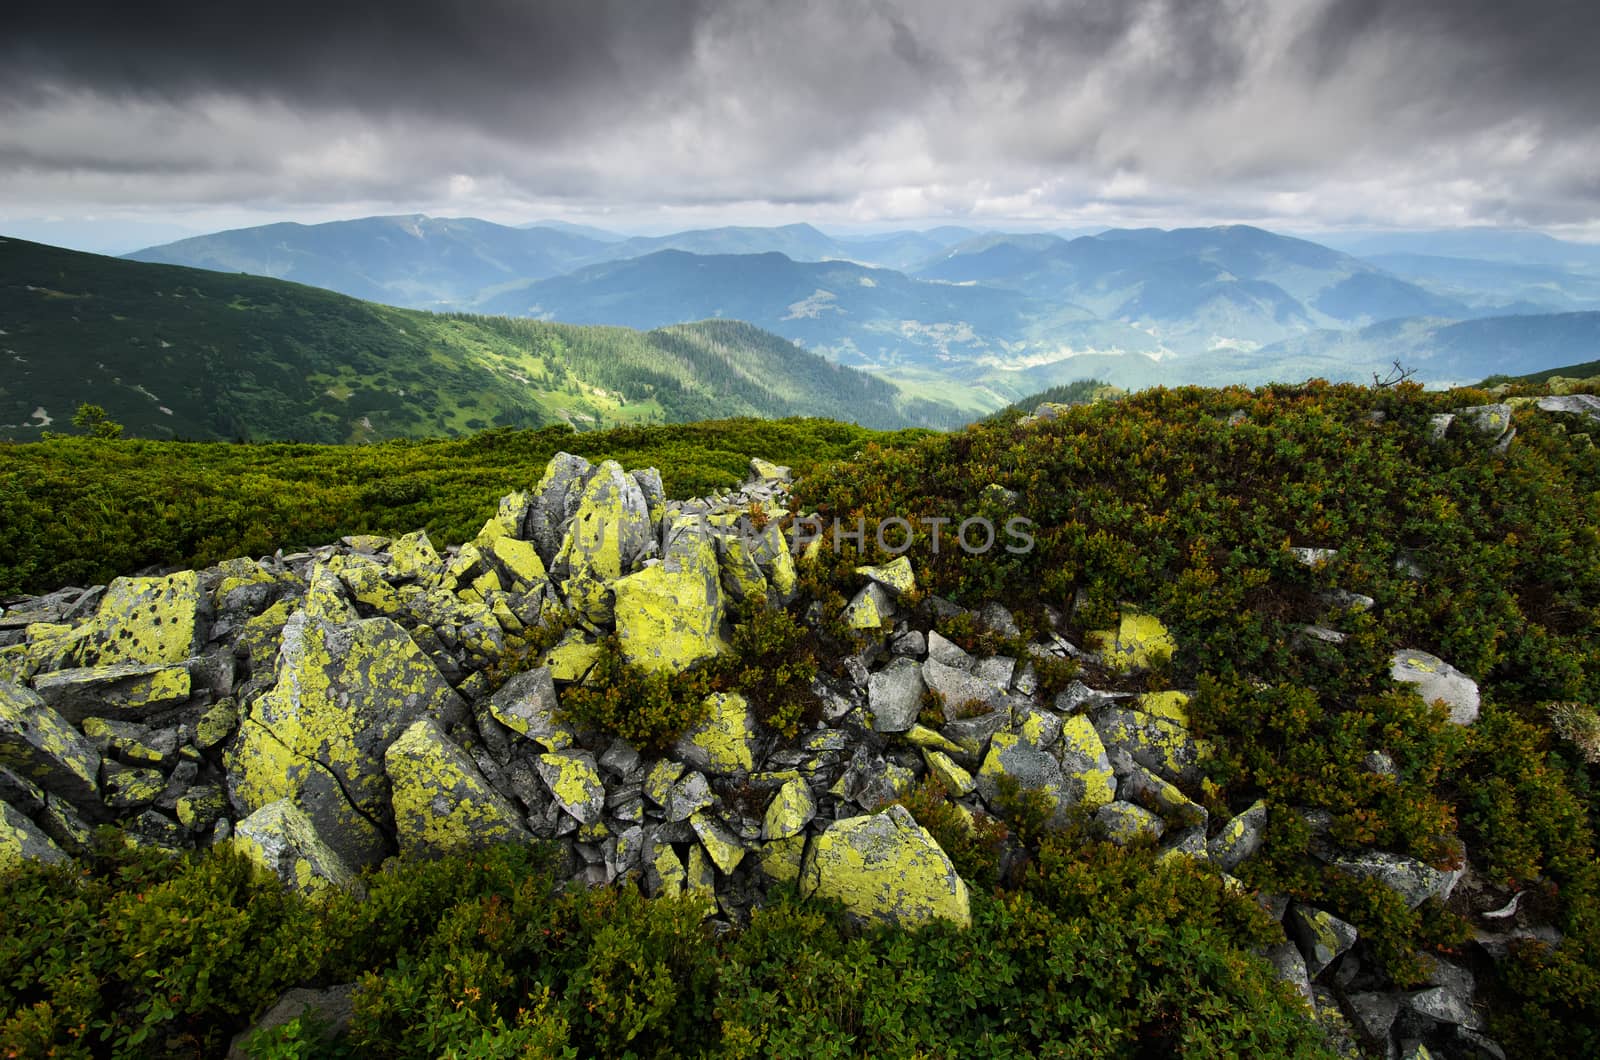 Mossy rocks in the bushes on the mountain landscape with heavy low clouds and distant mountains